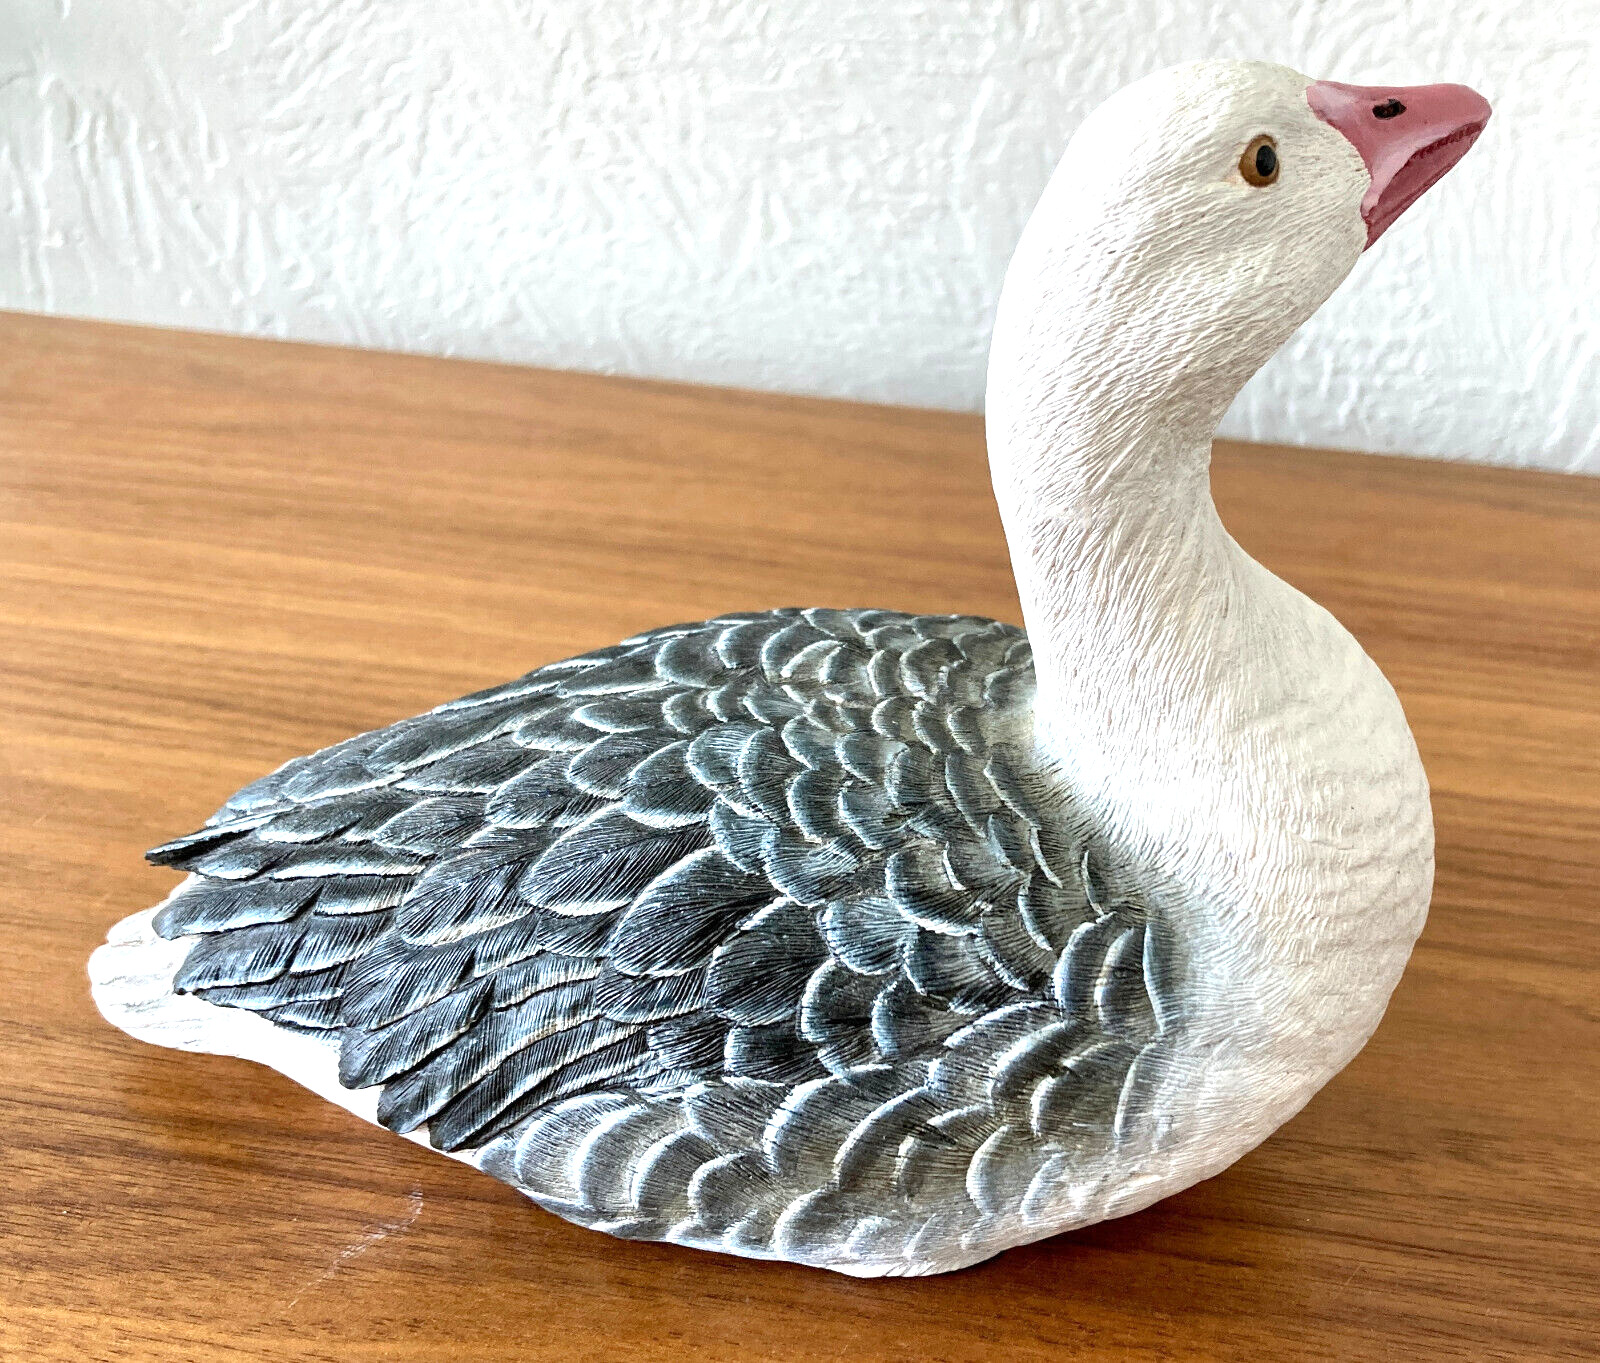 The Hadley Collection Snow Goose Figurine Collectable Quality Detailed Curio